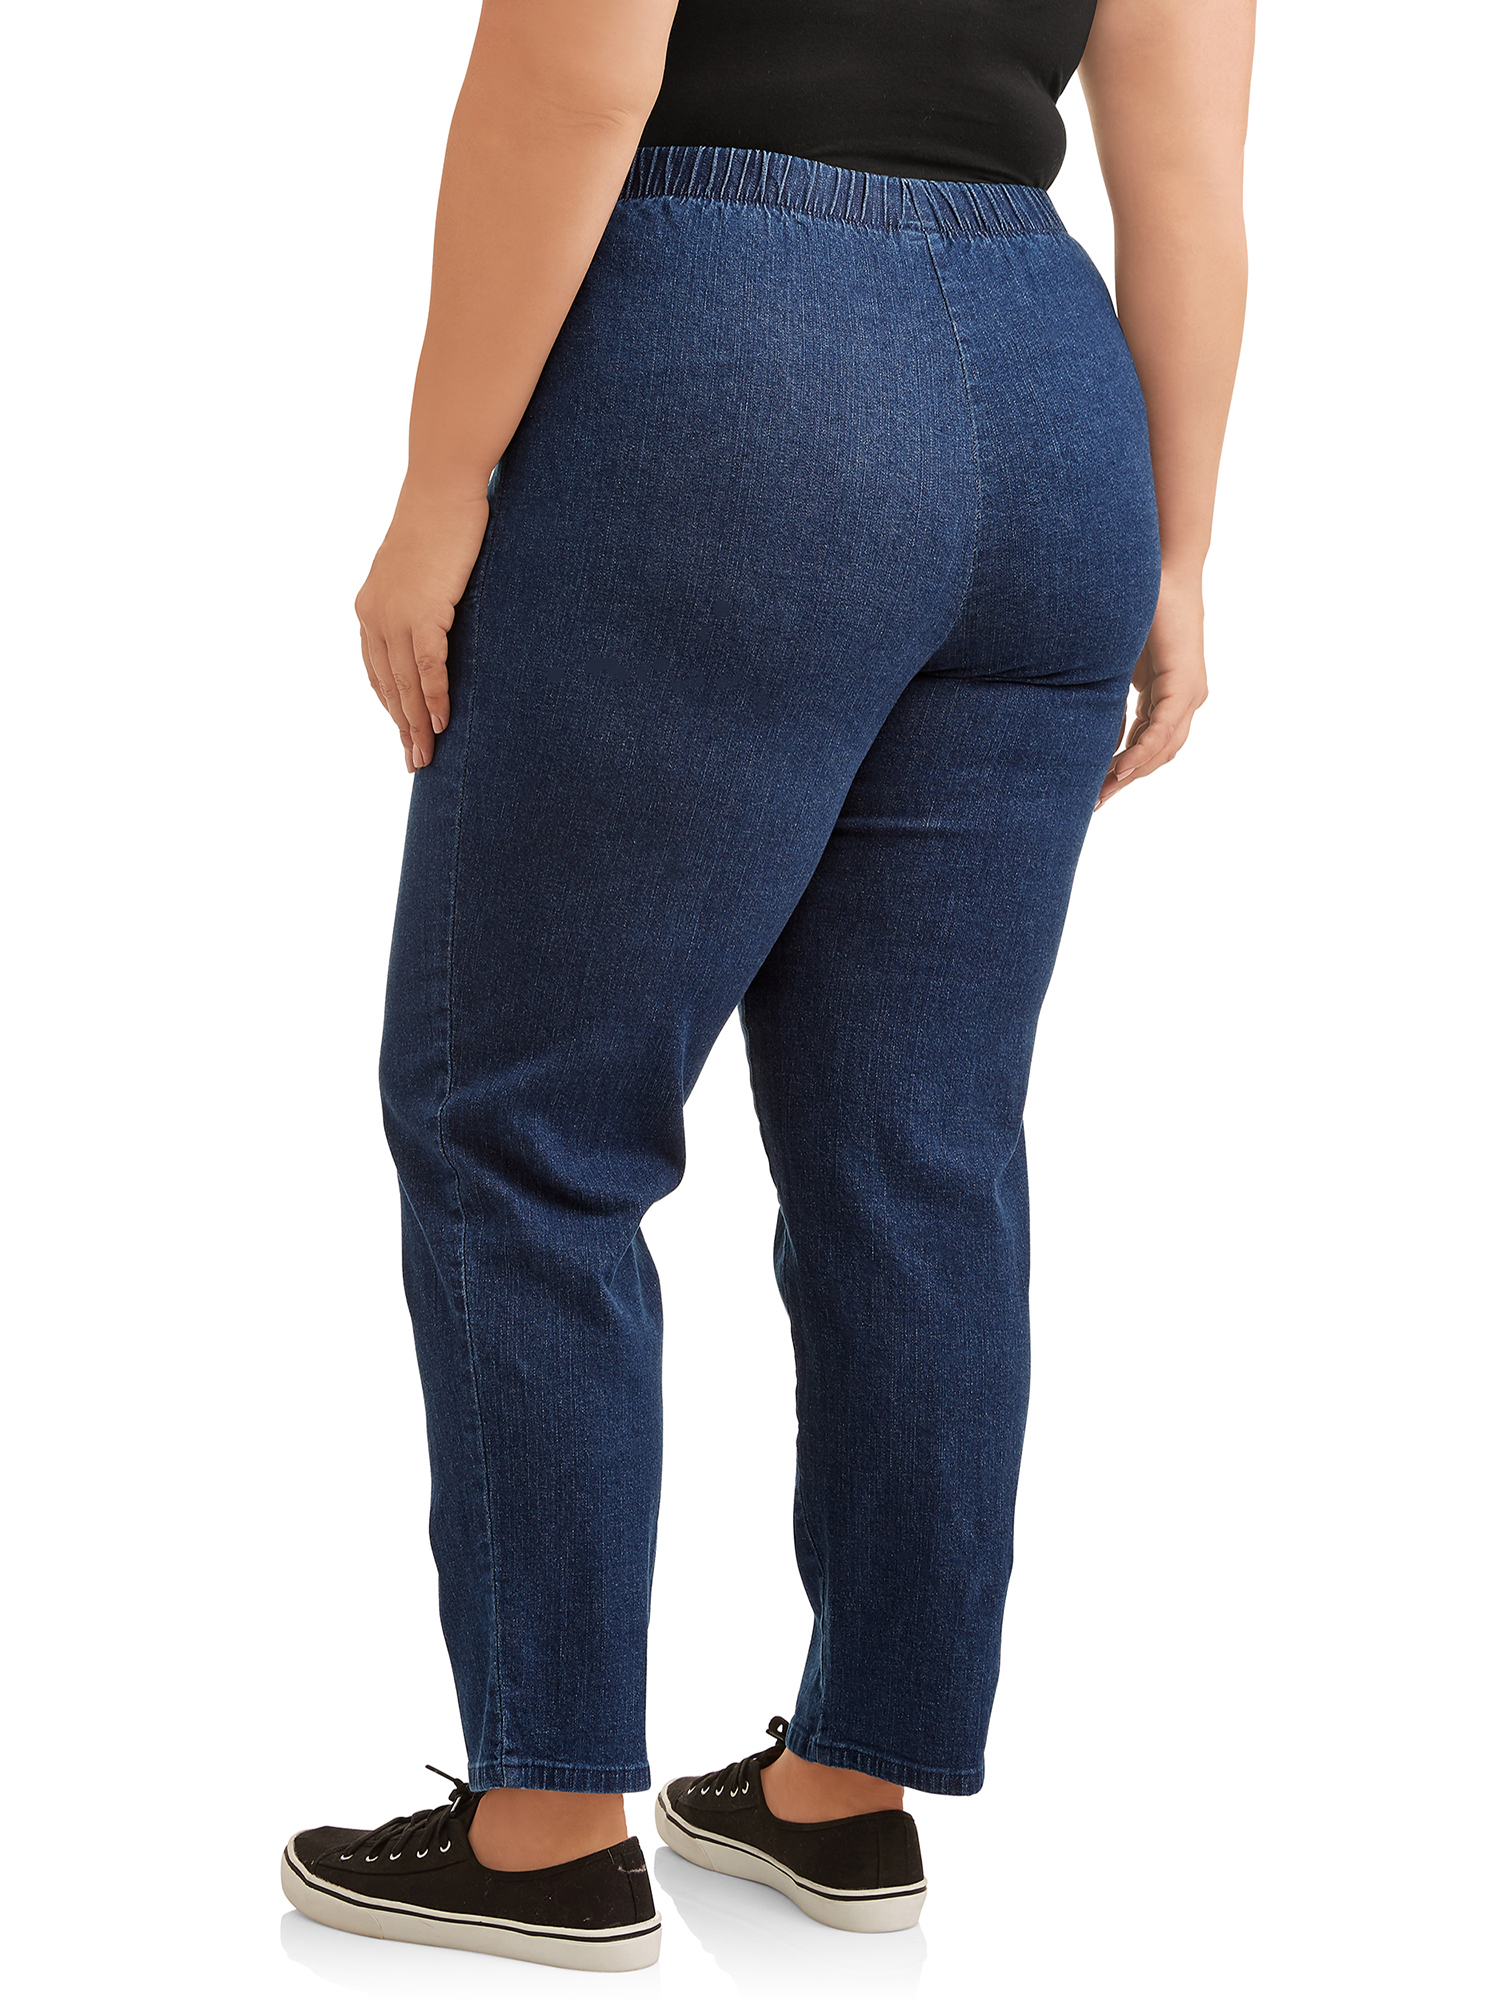 Just My Size Women's Plus Size 2 Pocket Pull On Pant, 2-Pack - image 3 of 7